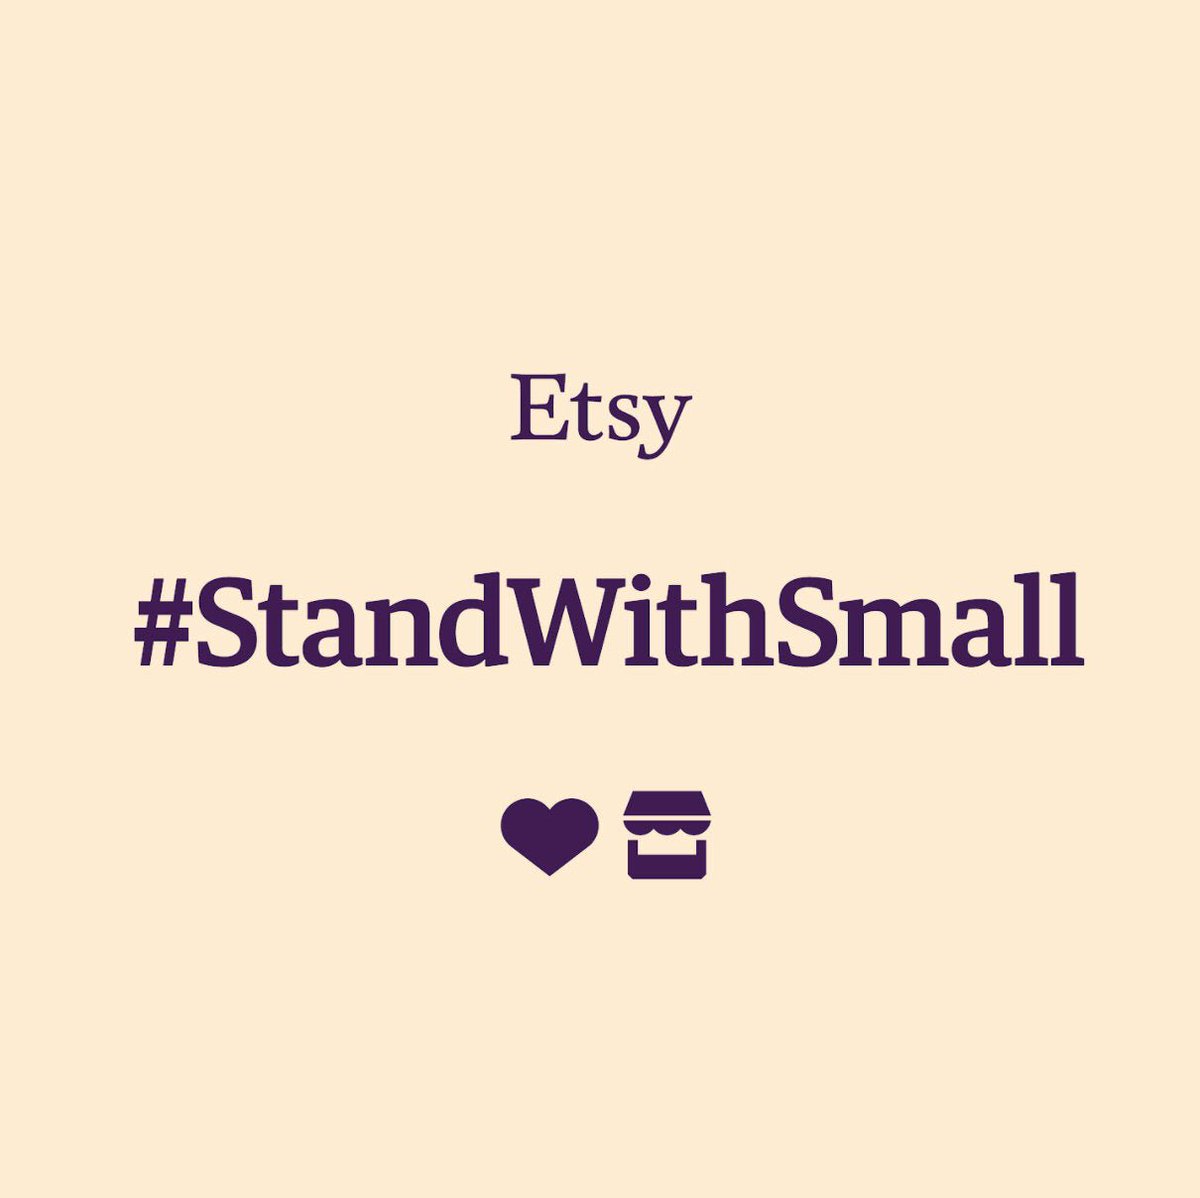 Small business owners like me need your support now more than ever. Shop from your favorite sellers on Etsy and repost this #StandWithSmall etsy.com/in-en/shop/Gem… #StandWithSmall #etsy etsy.me/3bJJuh2